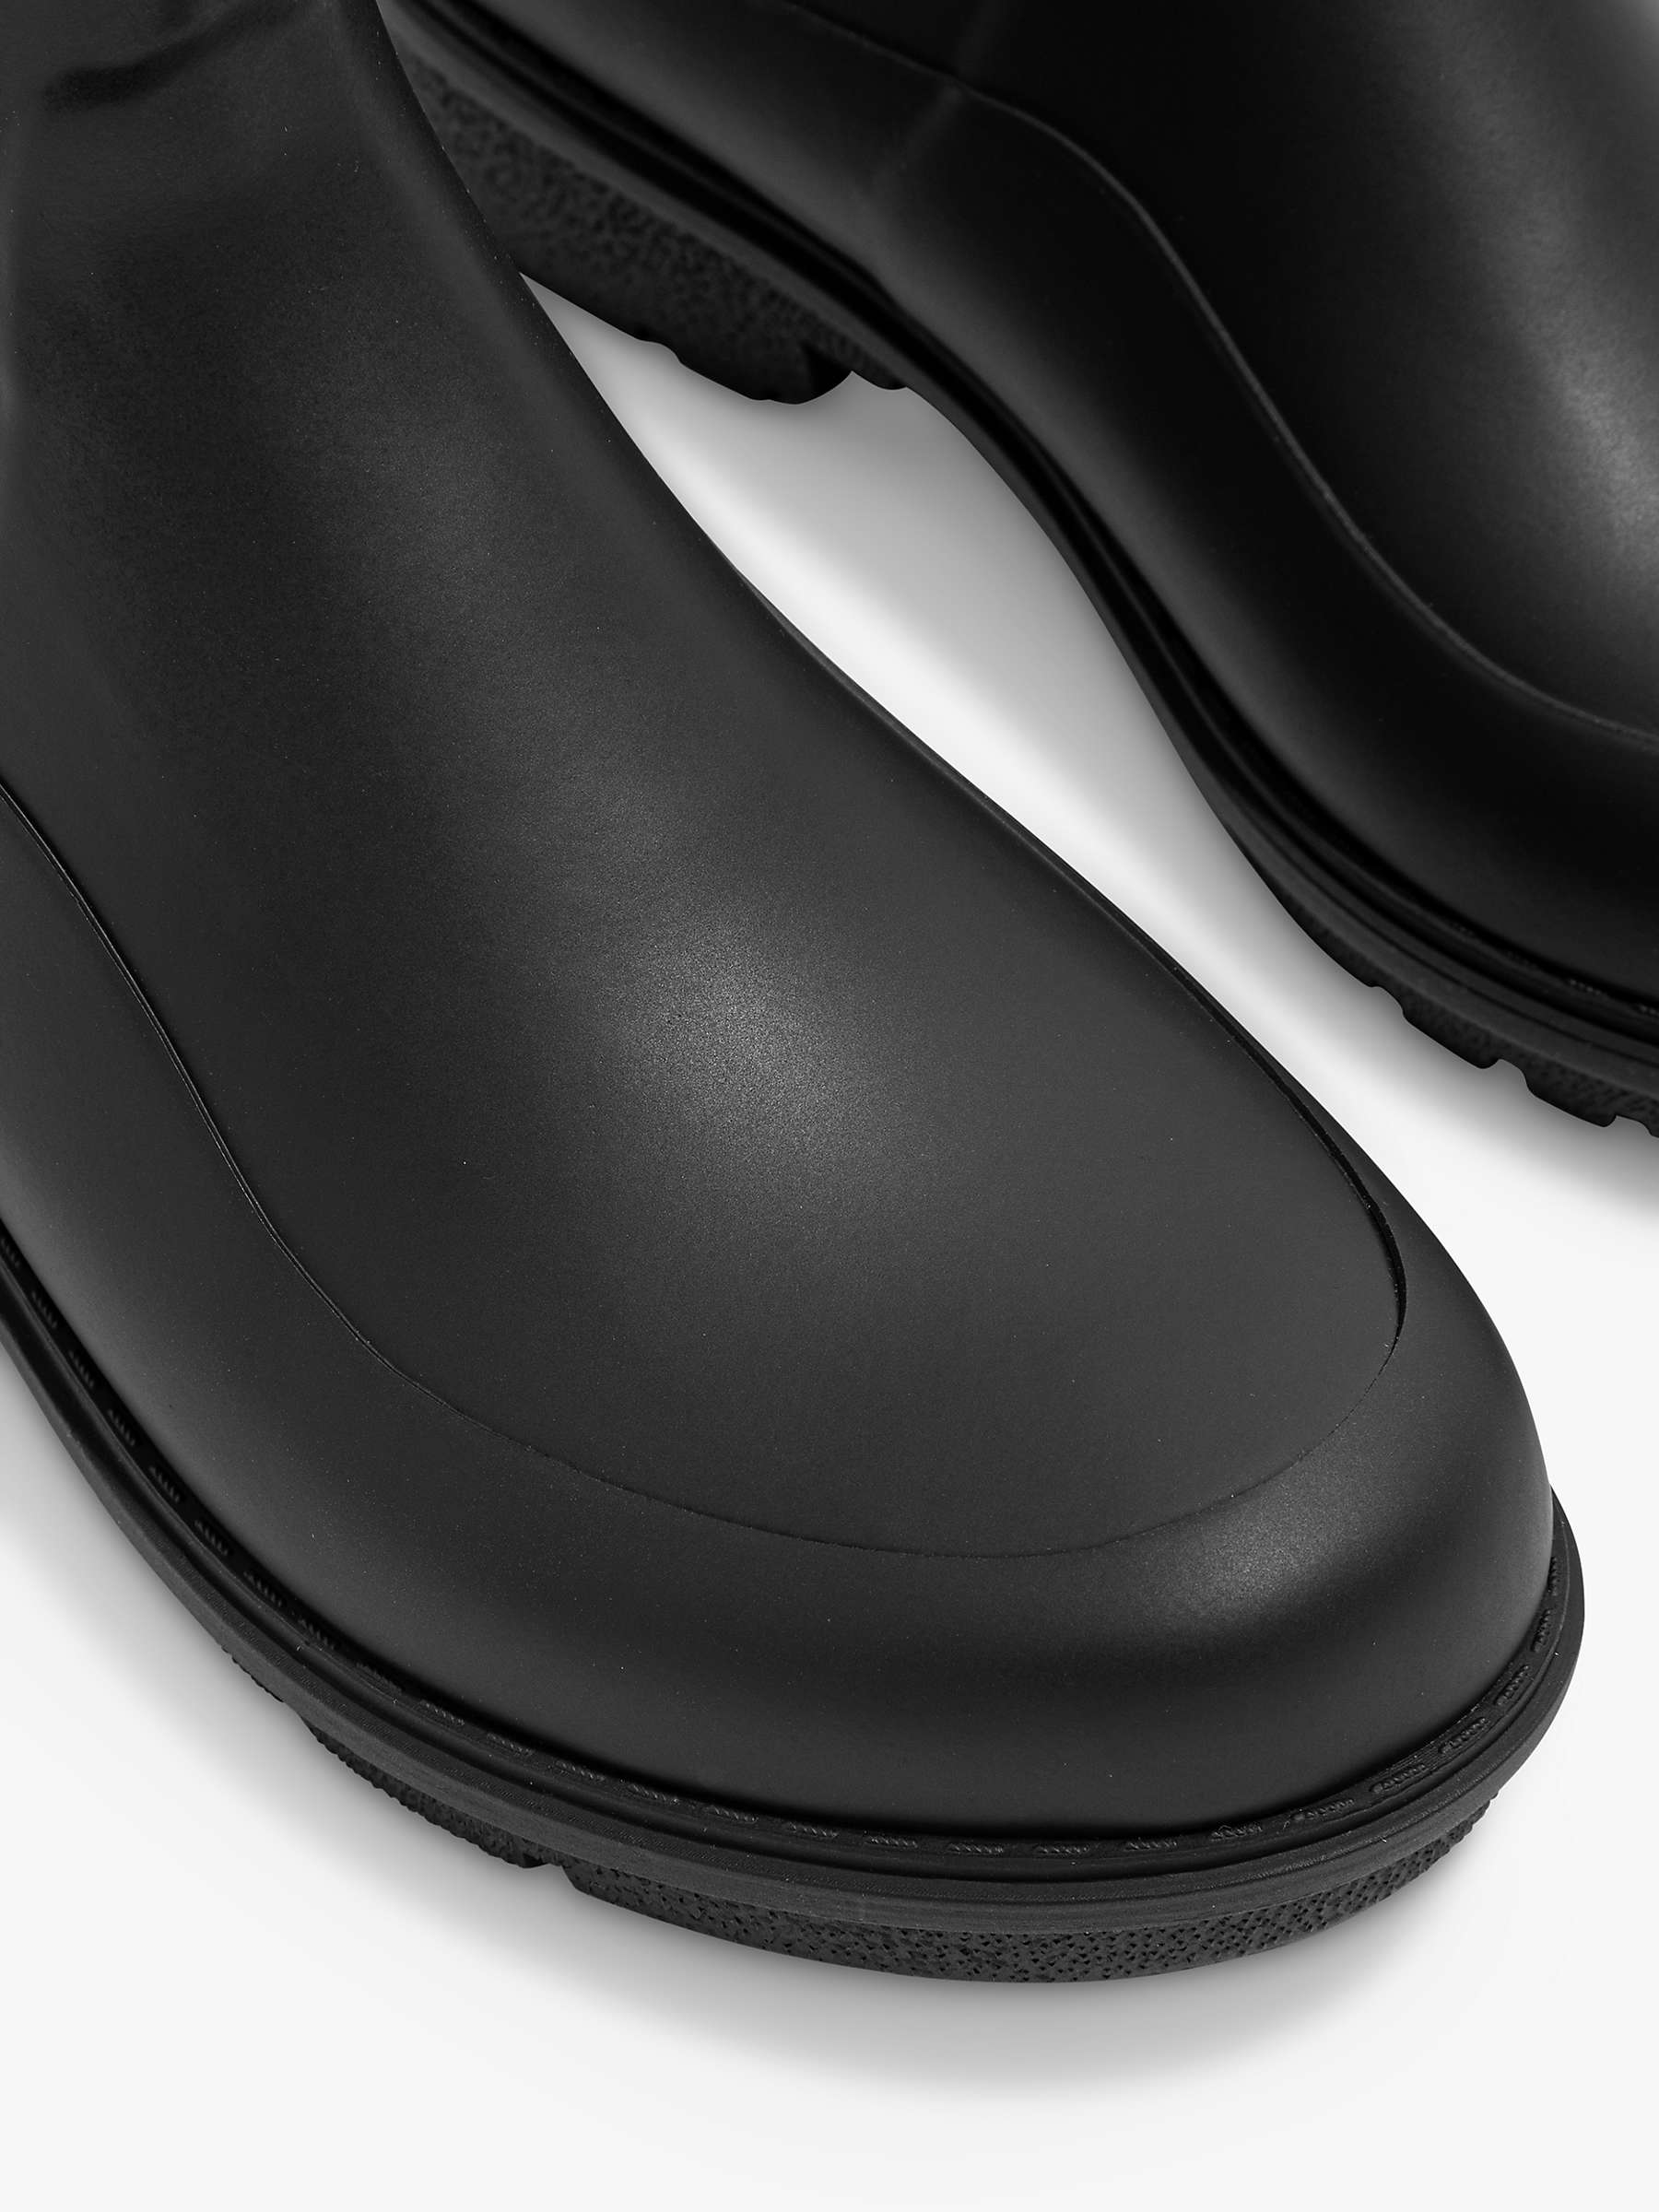 Buy FitFlop WonderWelly Short Chelsea Wellington Boots Online at johnlewis.com